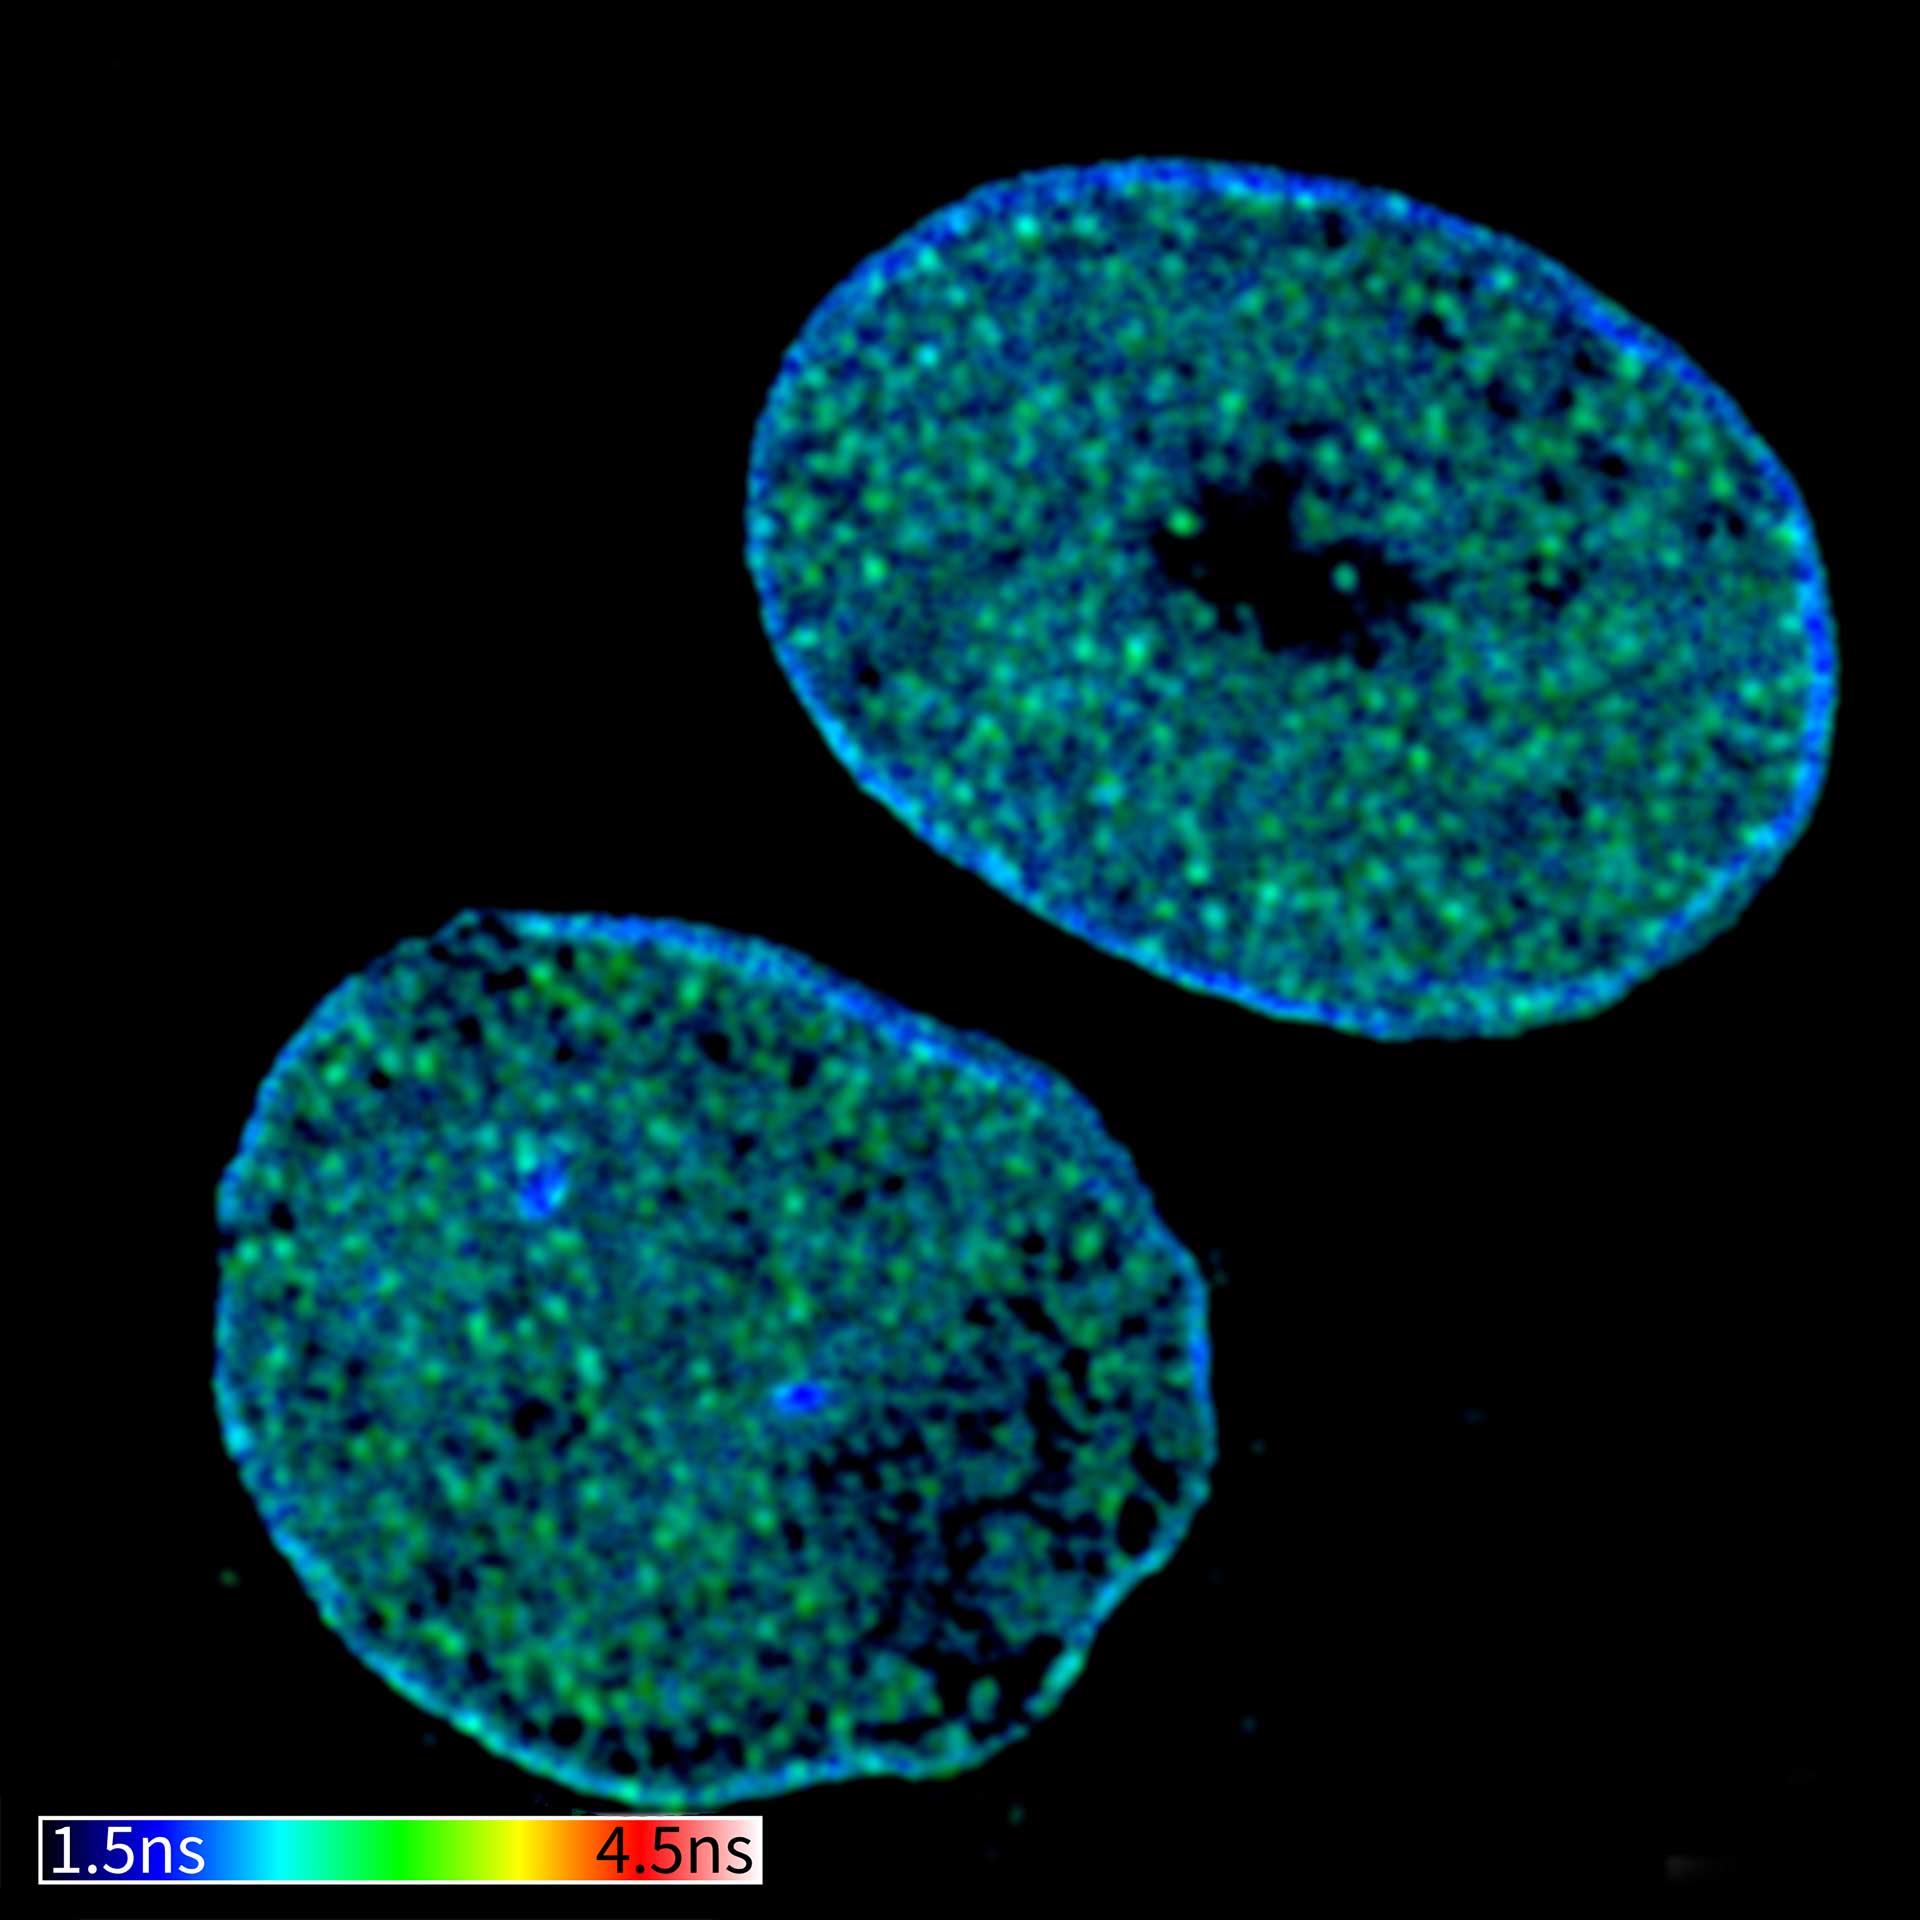 TIMEBOW Confocal and TIMEBOW STED image of mammalian cells labeled with antibodies against lamin/ Atto647N and DNA/ abberior STAR 635P.